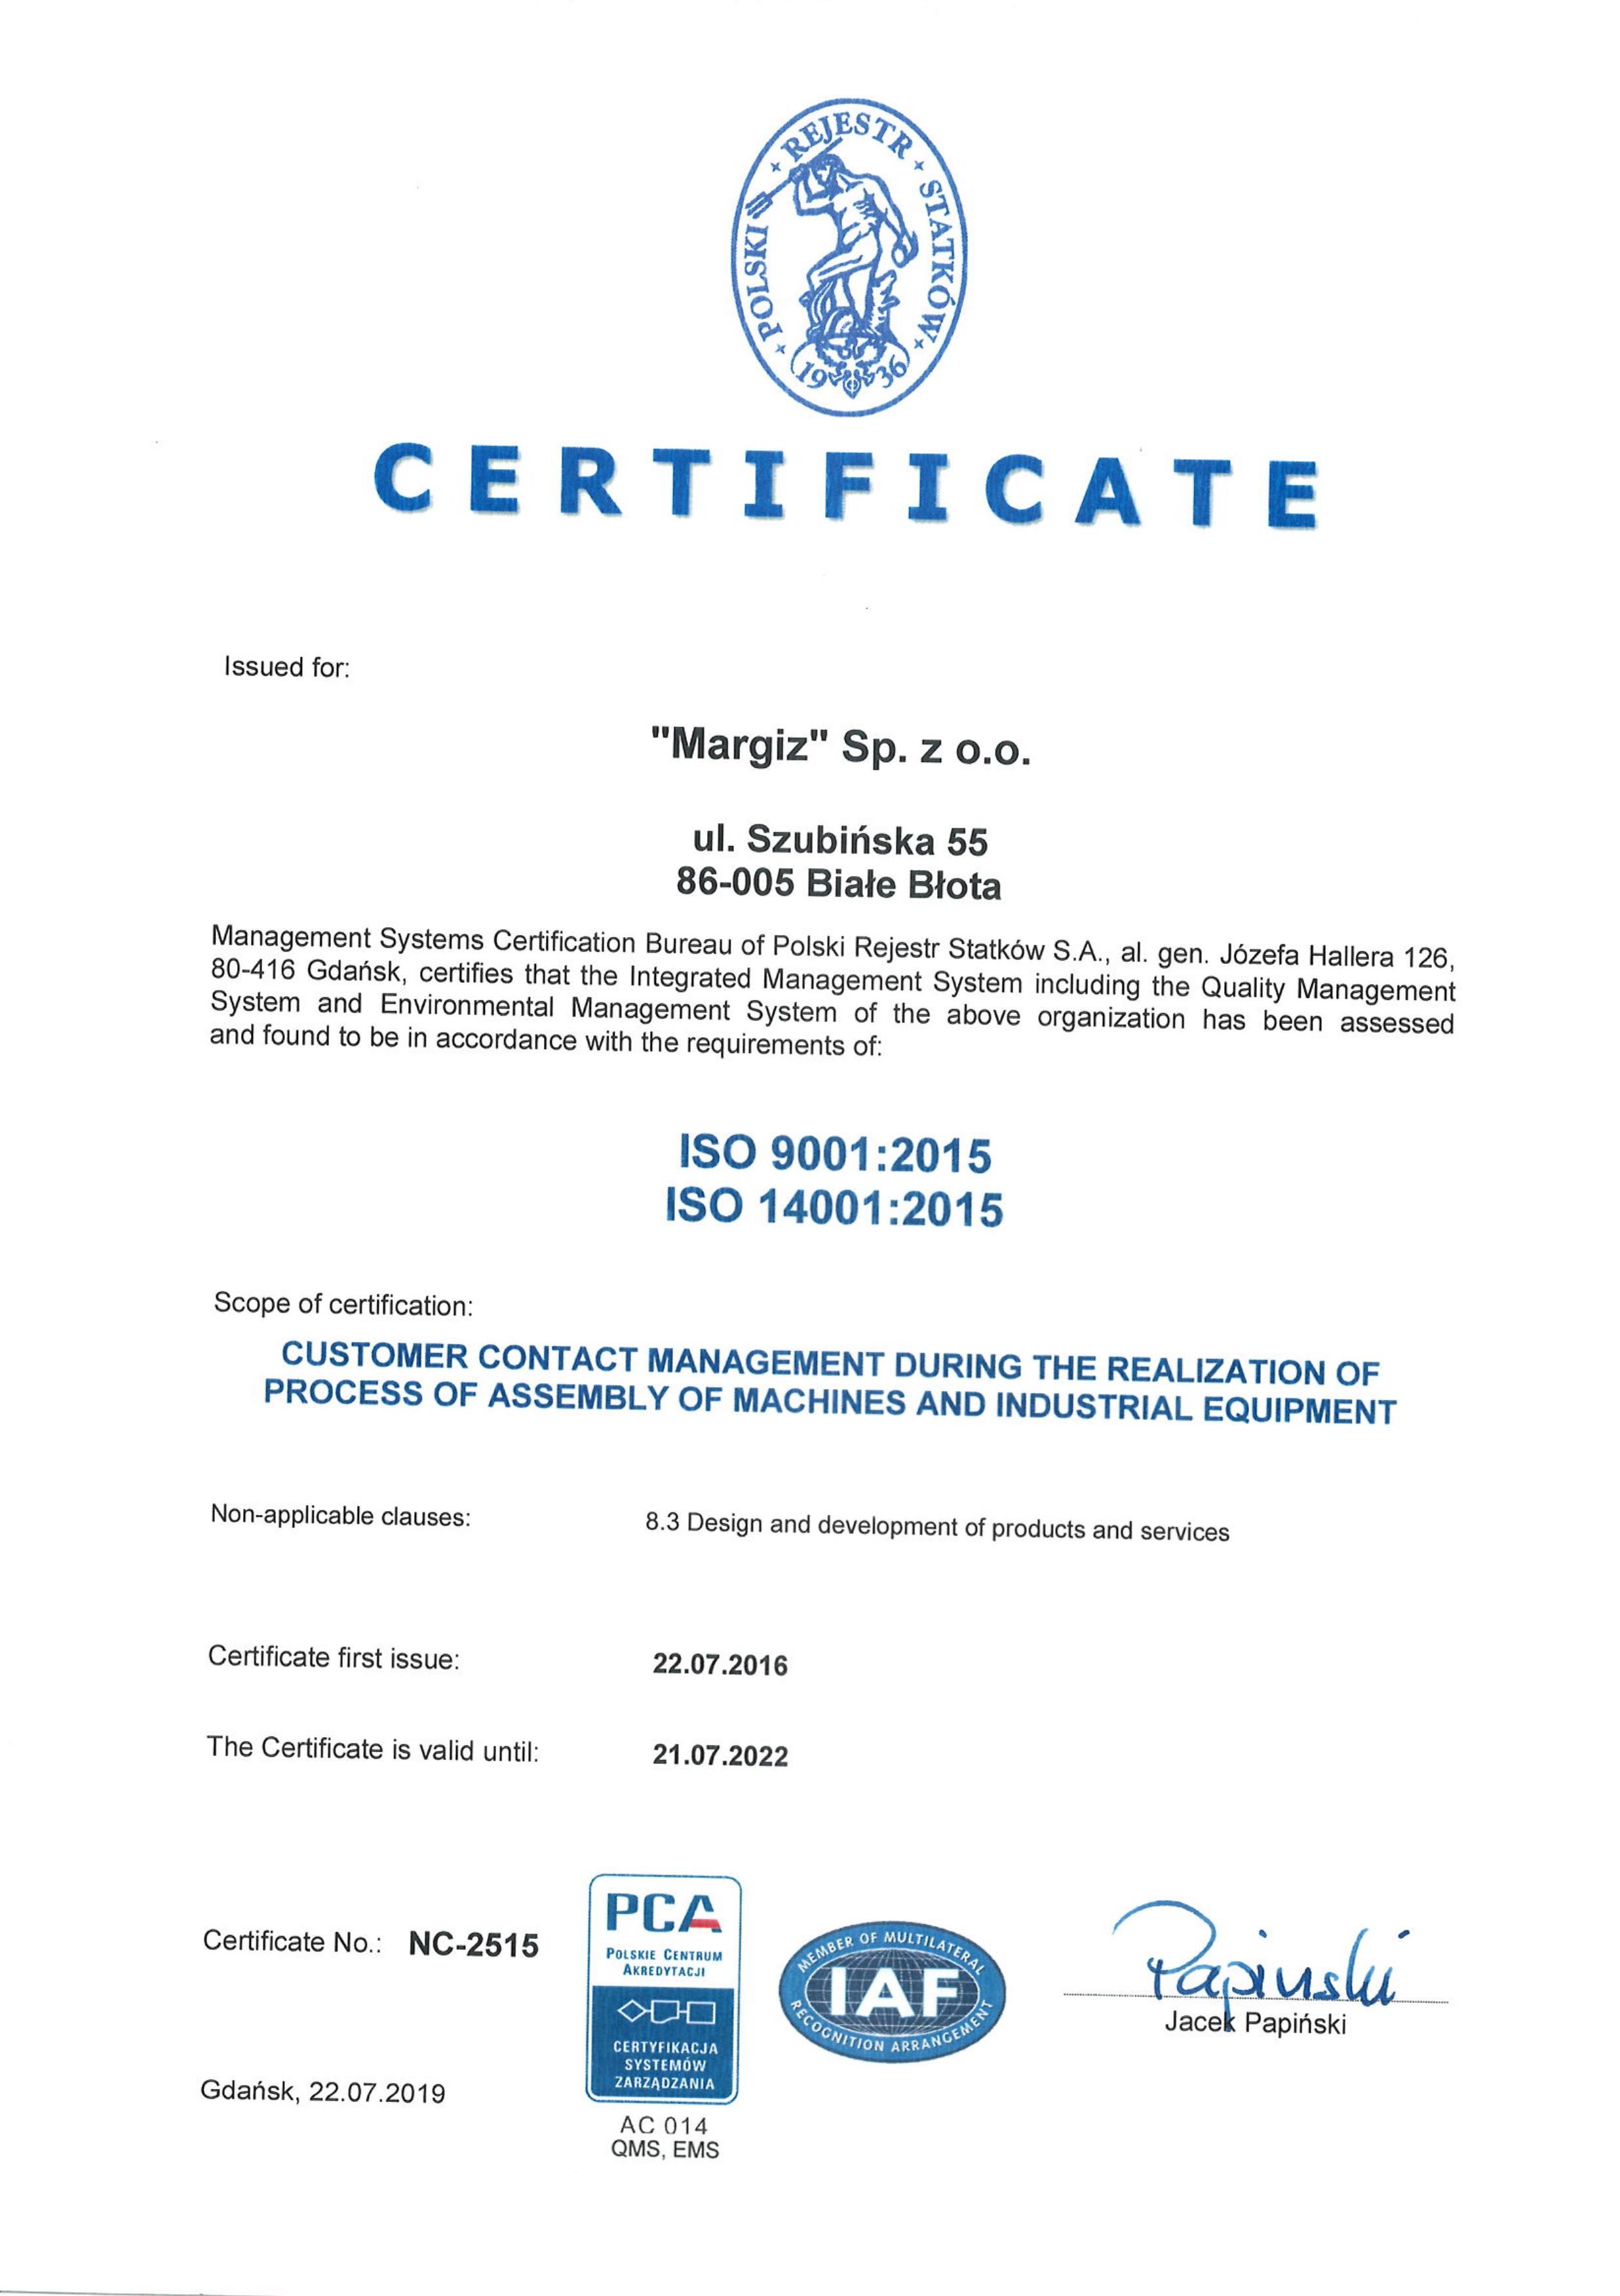 Our ISO certification is enlarged for another 3 years